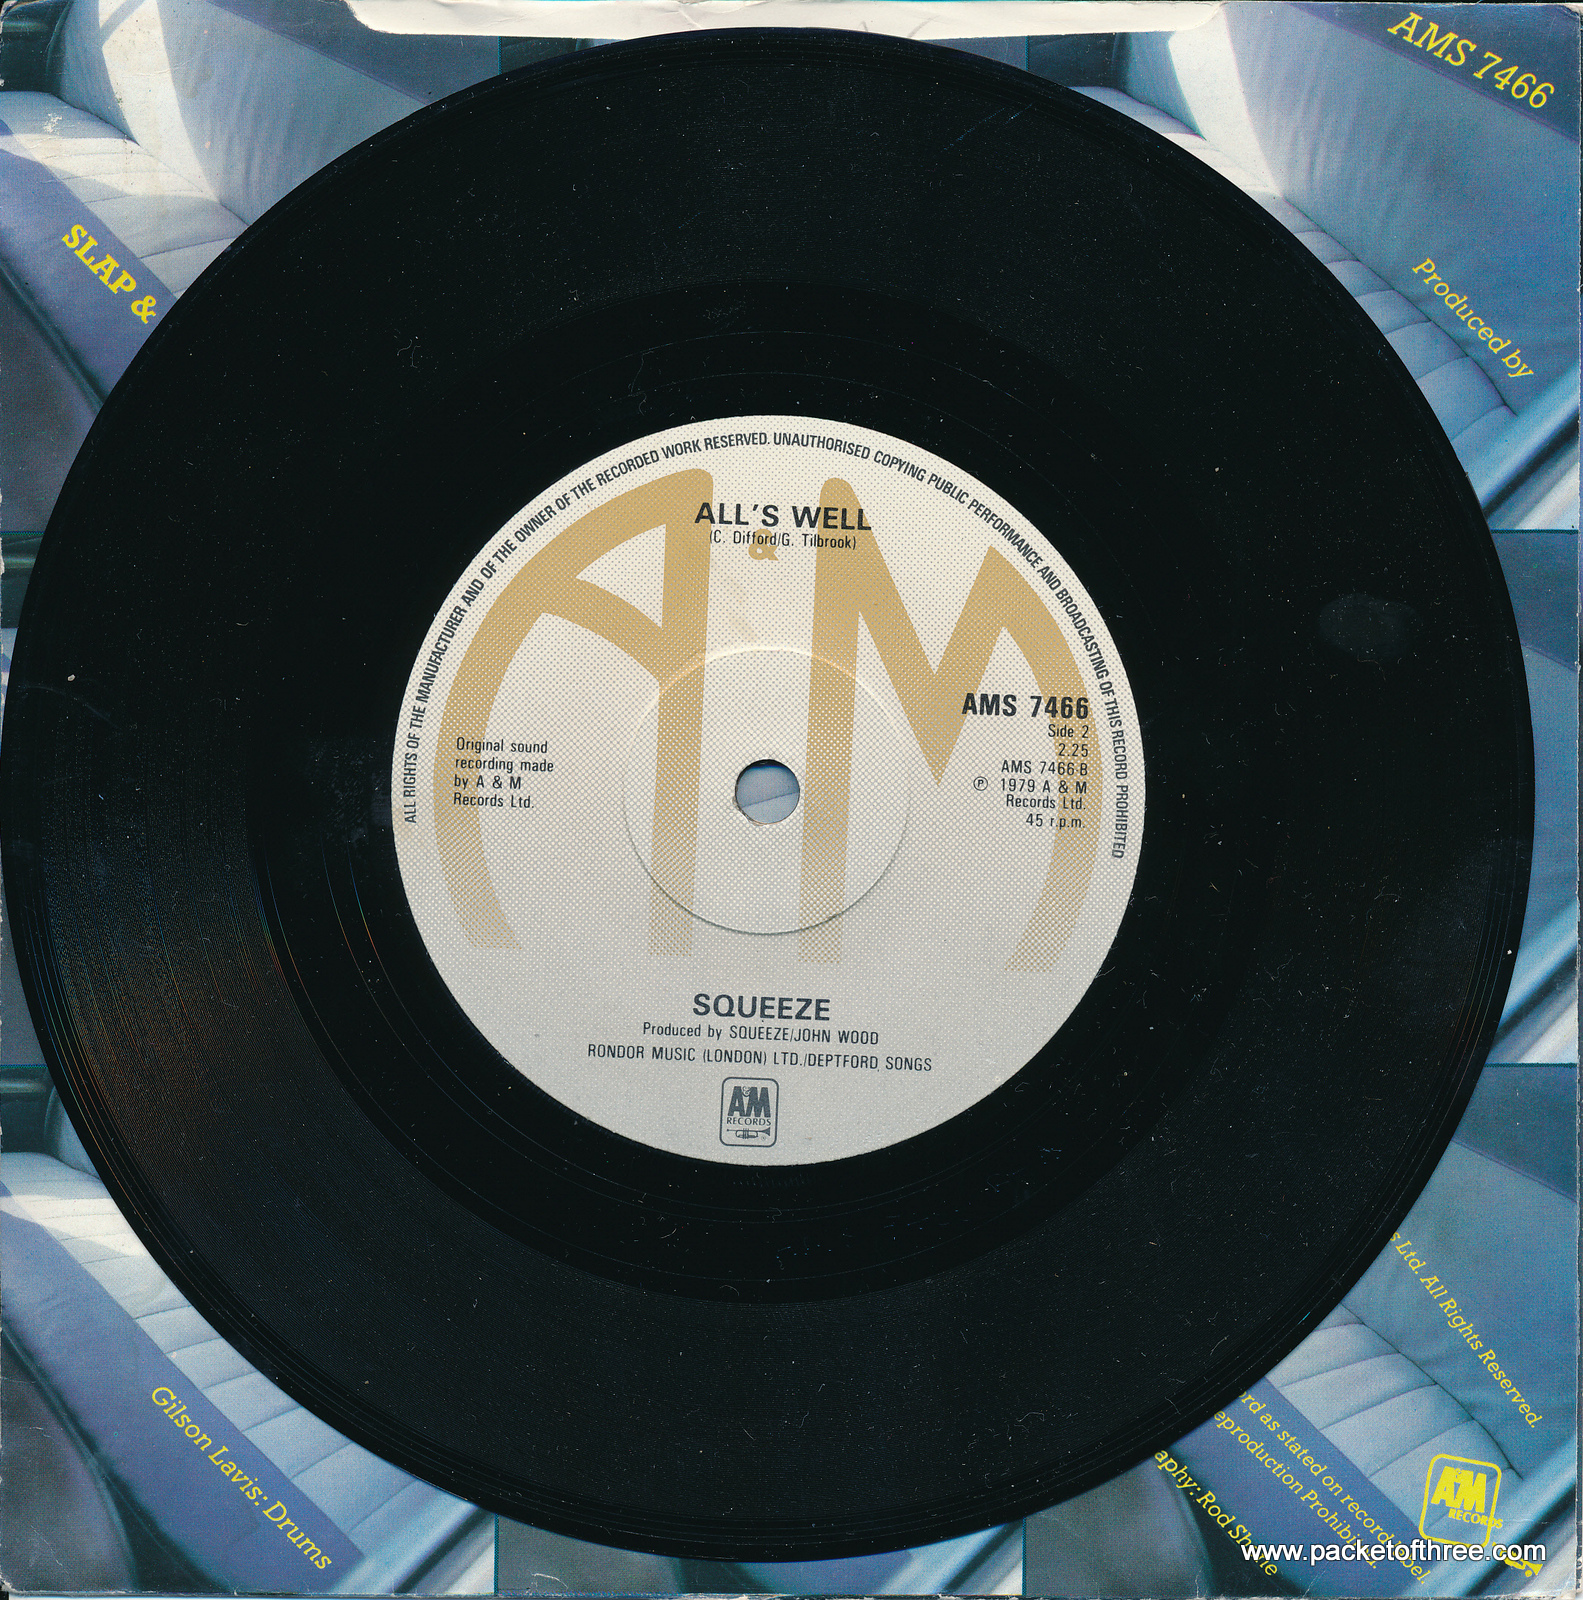 Slap and Tickle - UK - 7" - picture sleeve